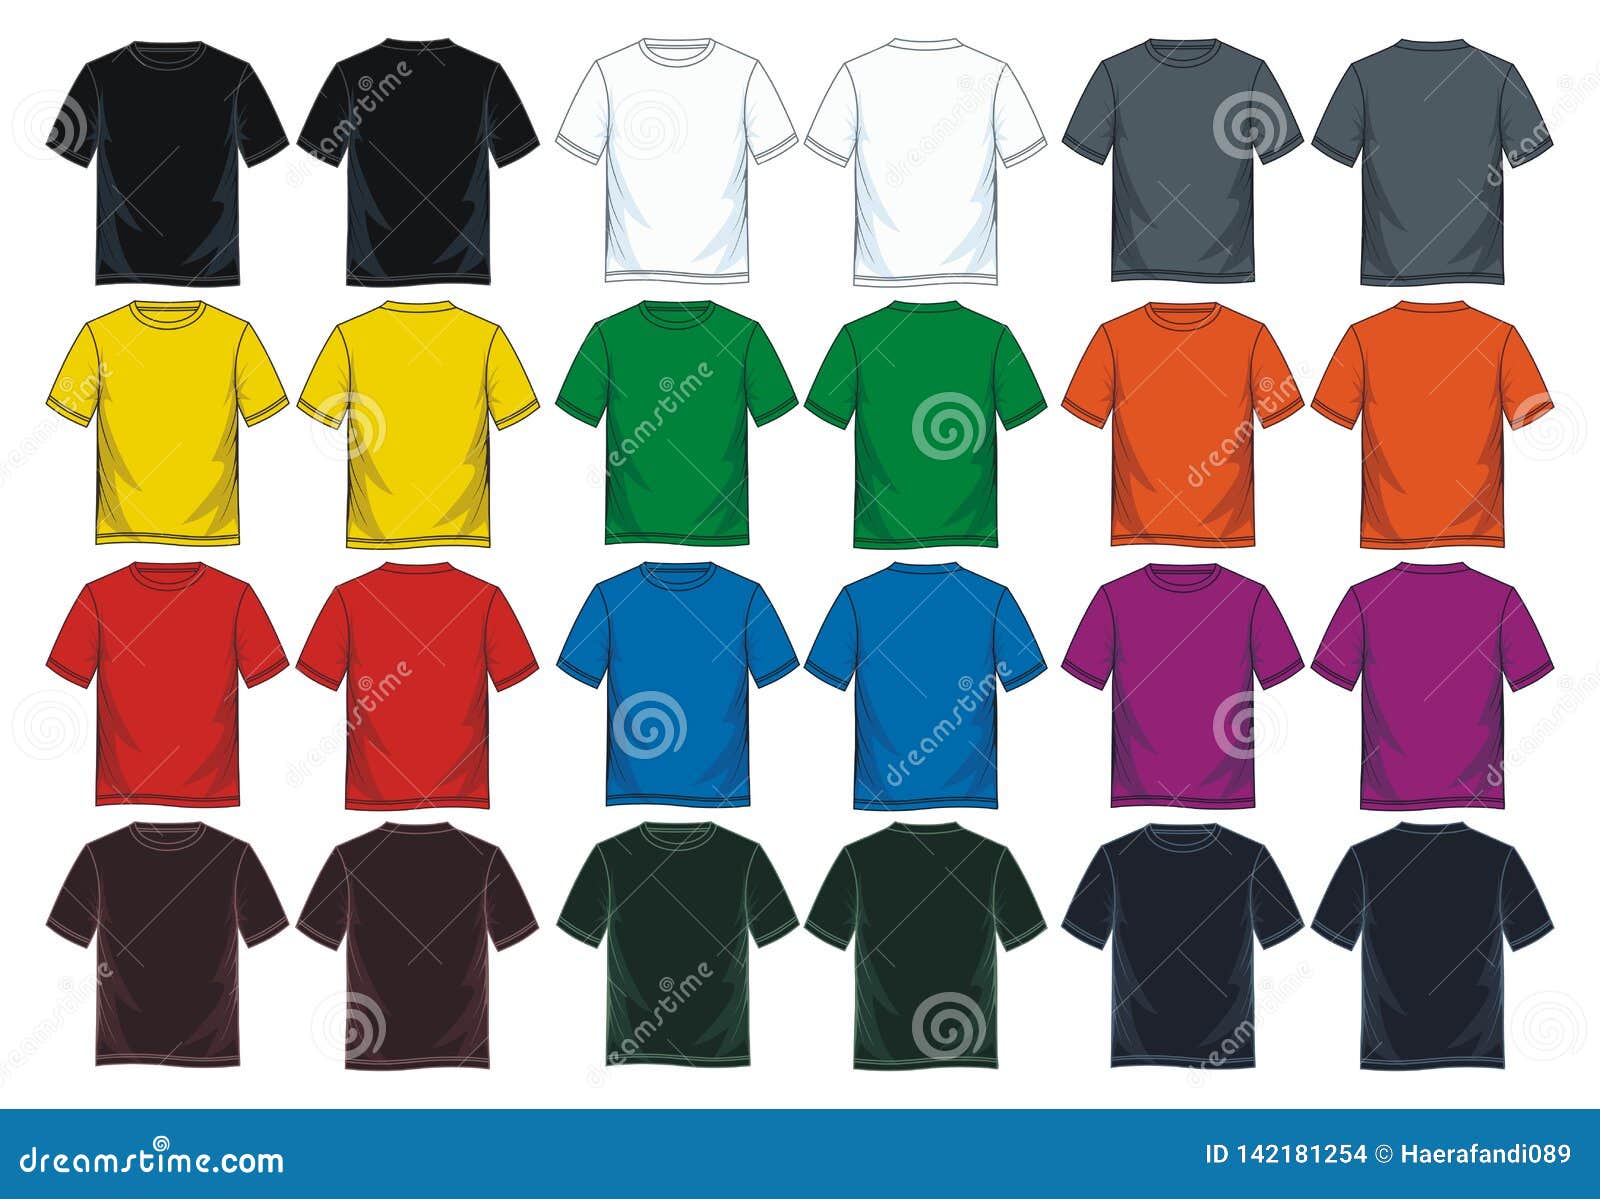 Download Men`s Round Neck T-shirt Templates, Front And Back Views ...